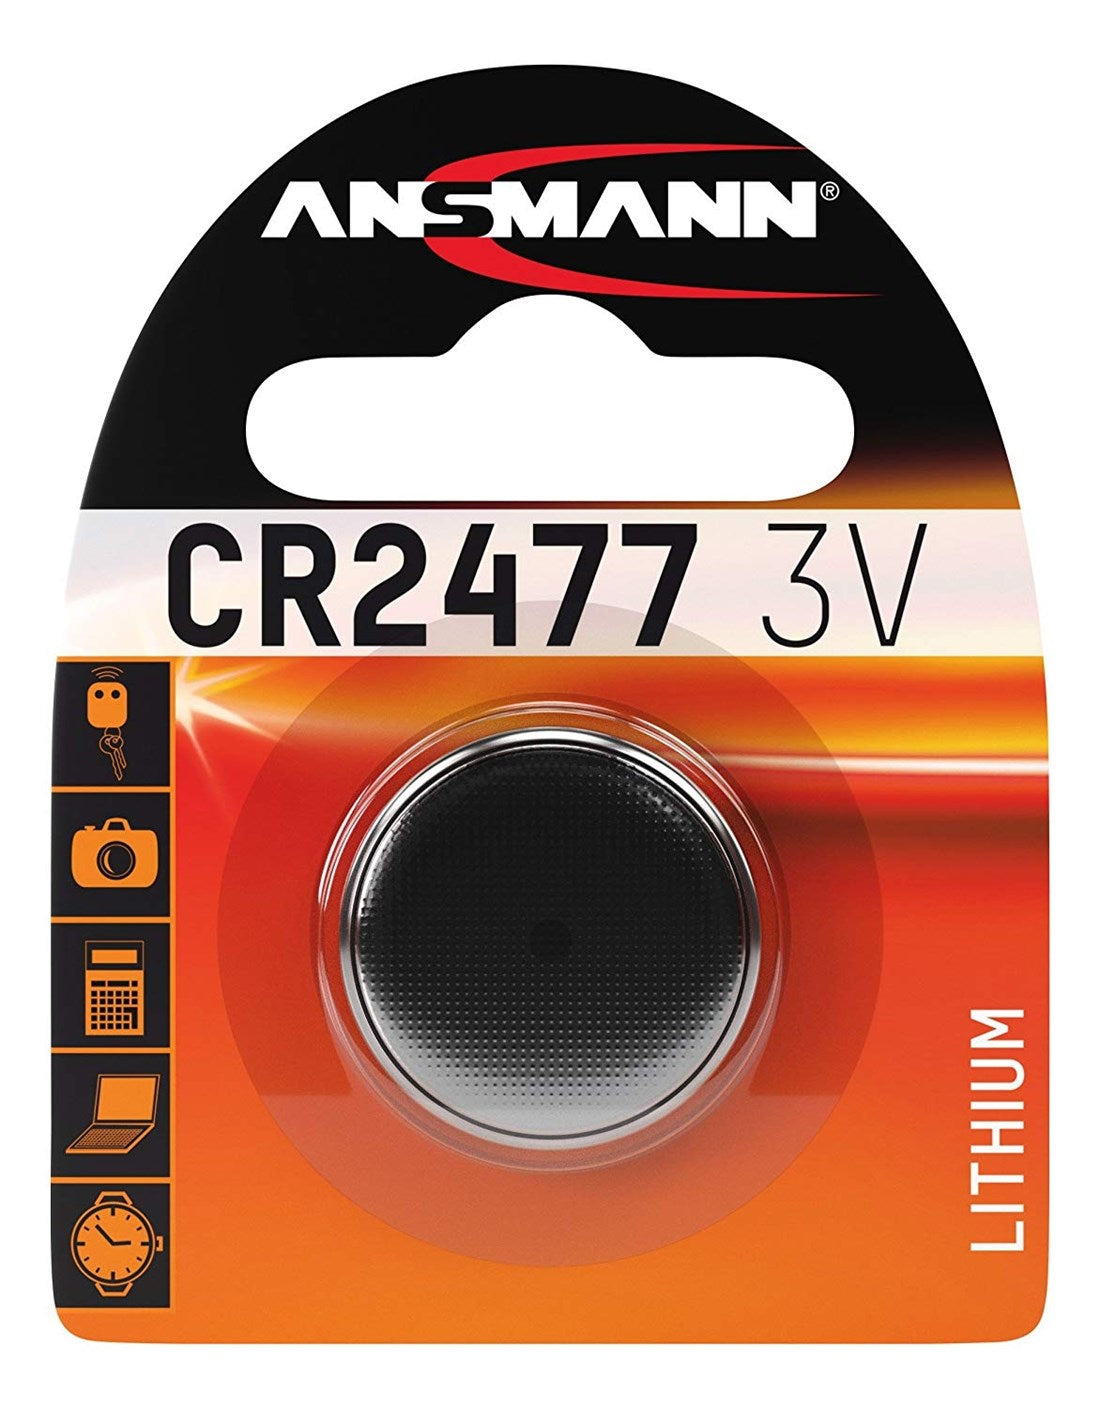 Product Image of AnSmann CR2477 3V Lithium Battery Cell (1516-0010)